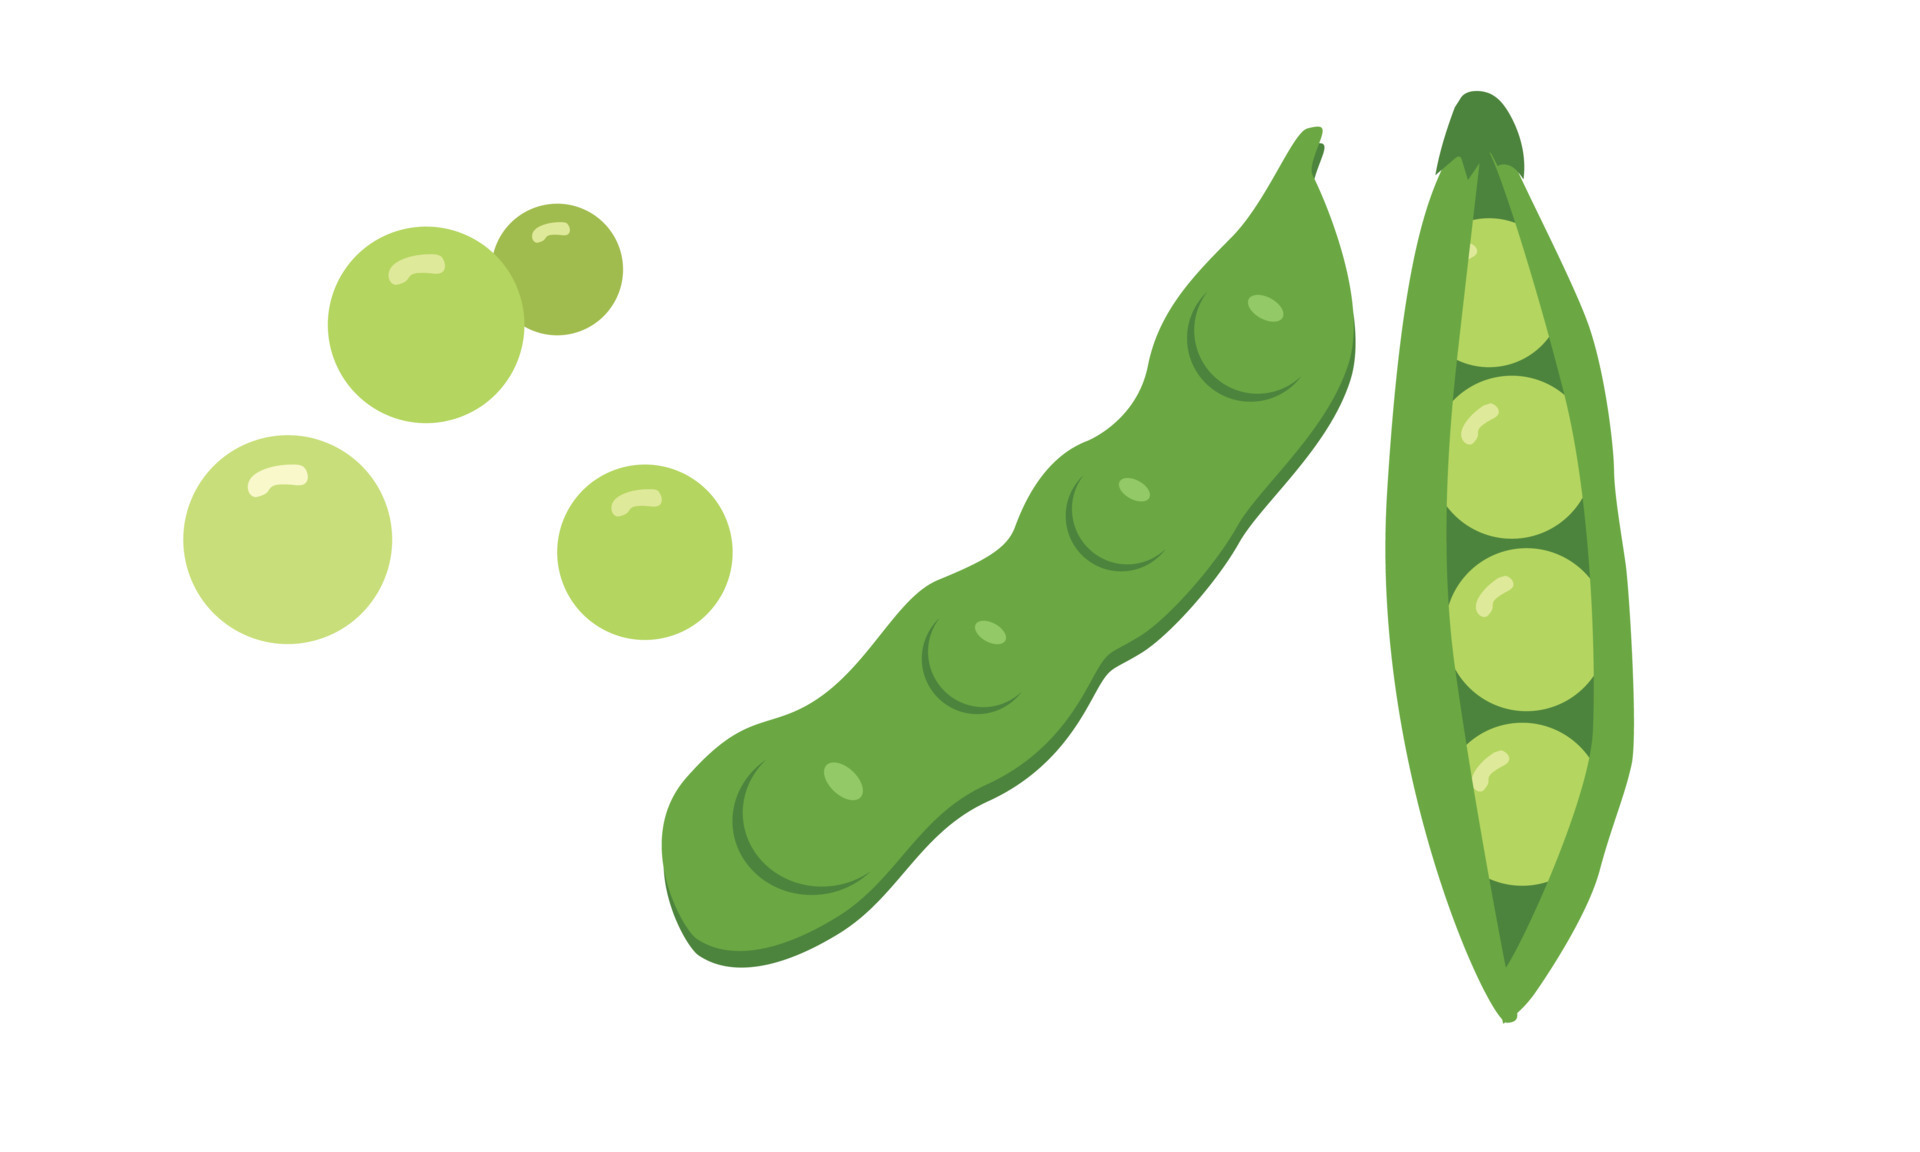 Simple green pea clipart vector illustration isolated on white background.  Pod of green peas flat cartoon style. Green peas sign icon. Organic food,  vegetables and restaurant concept 11157267 Vector Art at Vecteezy